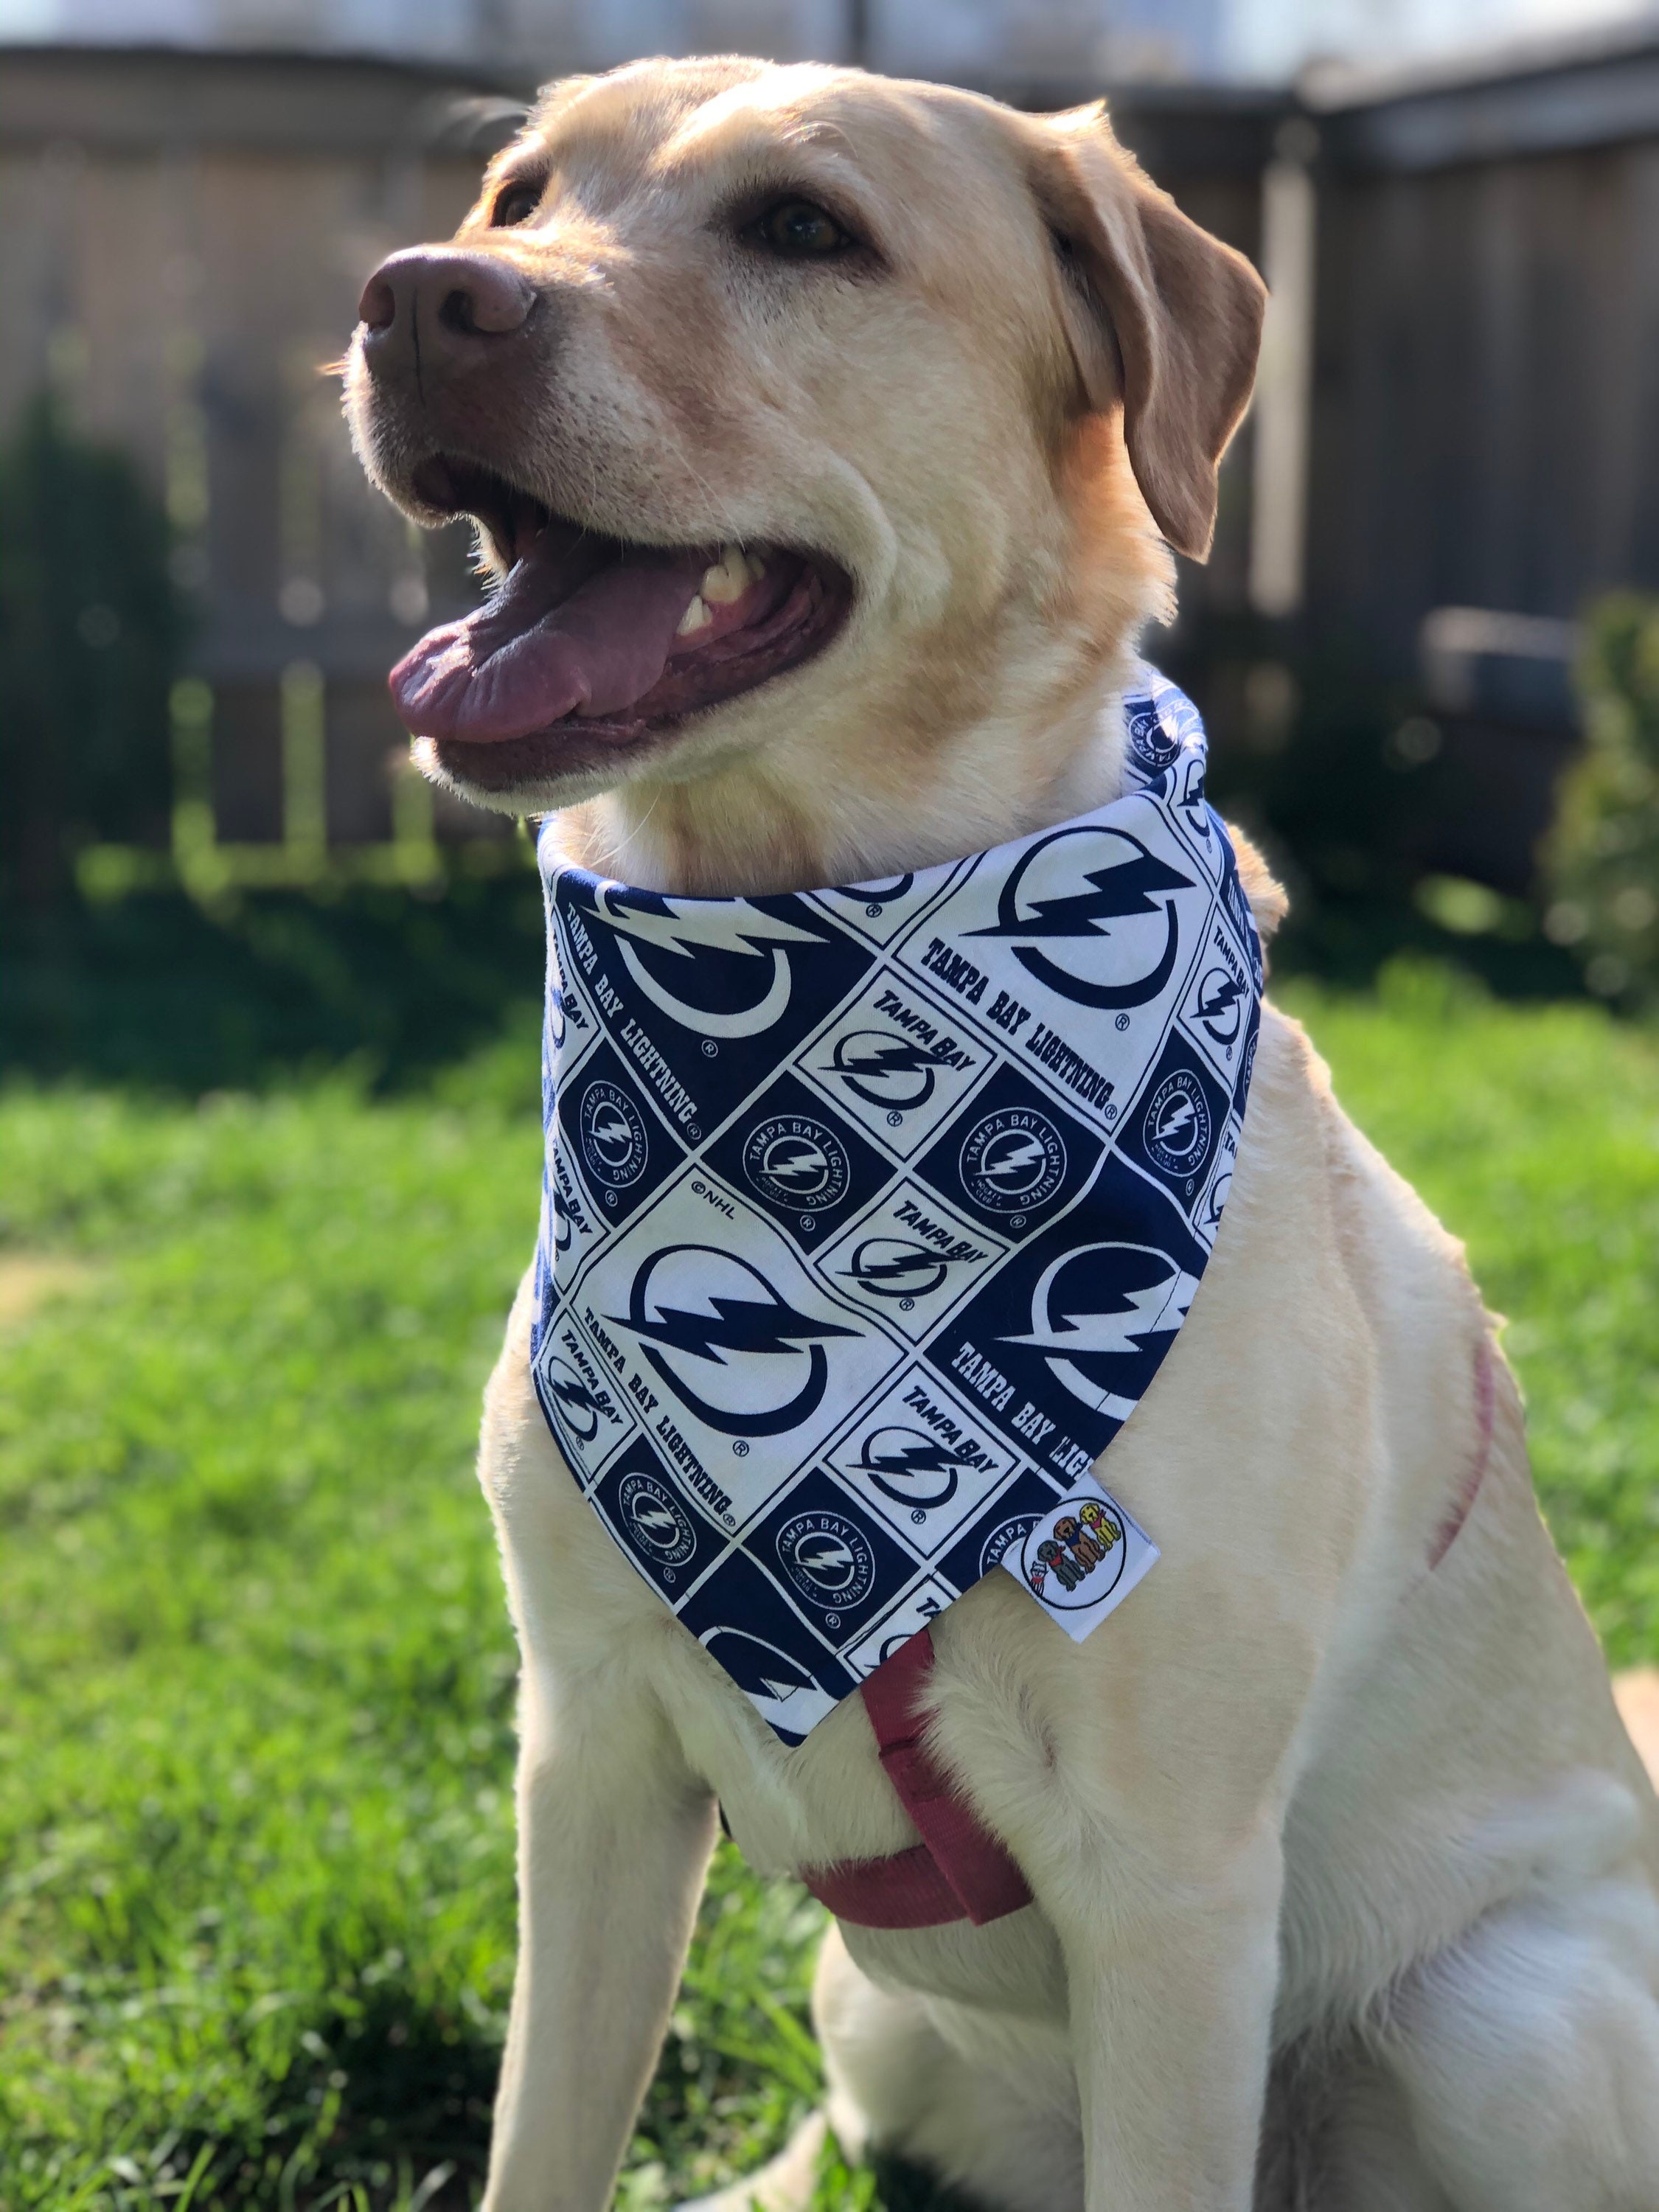  Pets First NHL Tampa Bay Lightning Bandana for Dogs & Cats,  Large/X-Large. - Cute & Stylish Bandana! The Perfect Hockey Fan Scarf  Bandana, Great for Birthdays Or Any Party! 